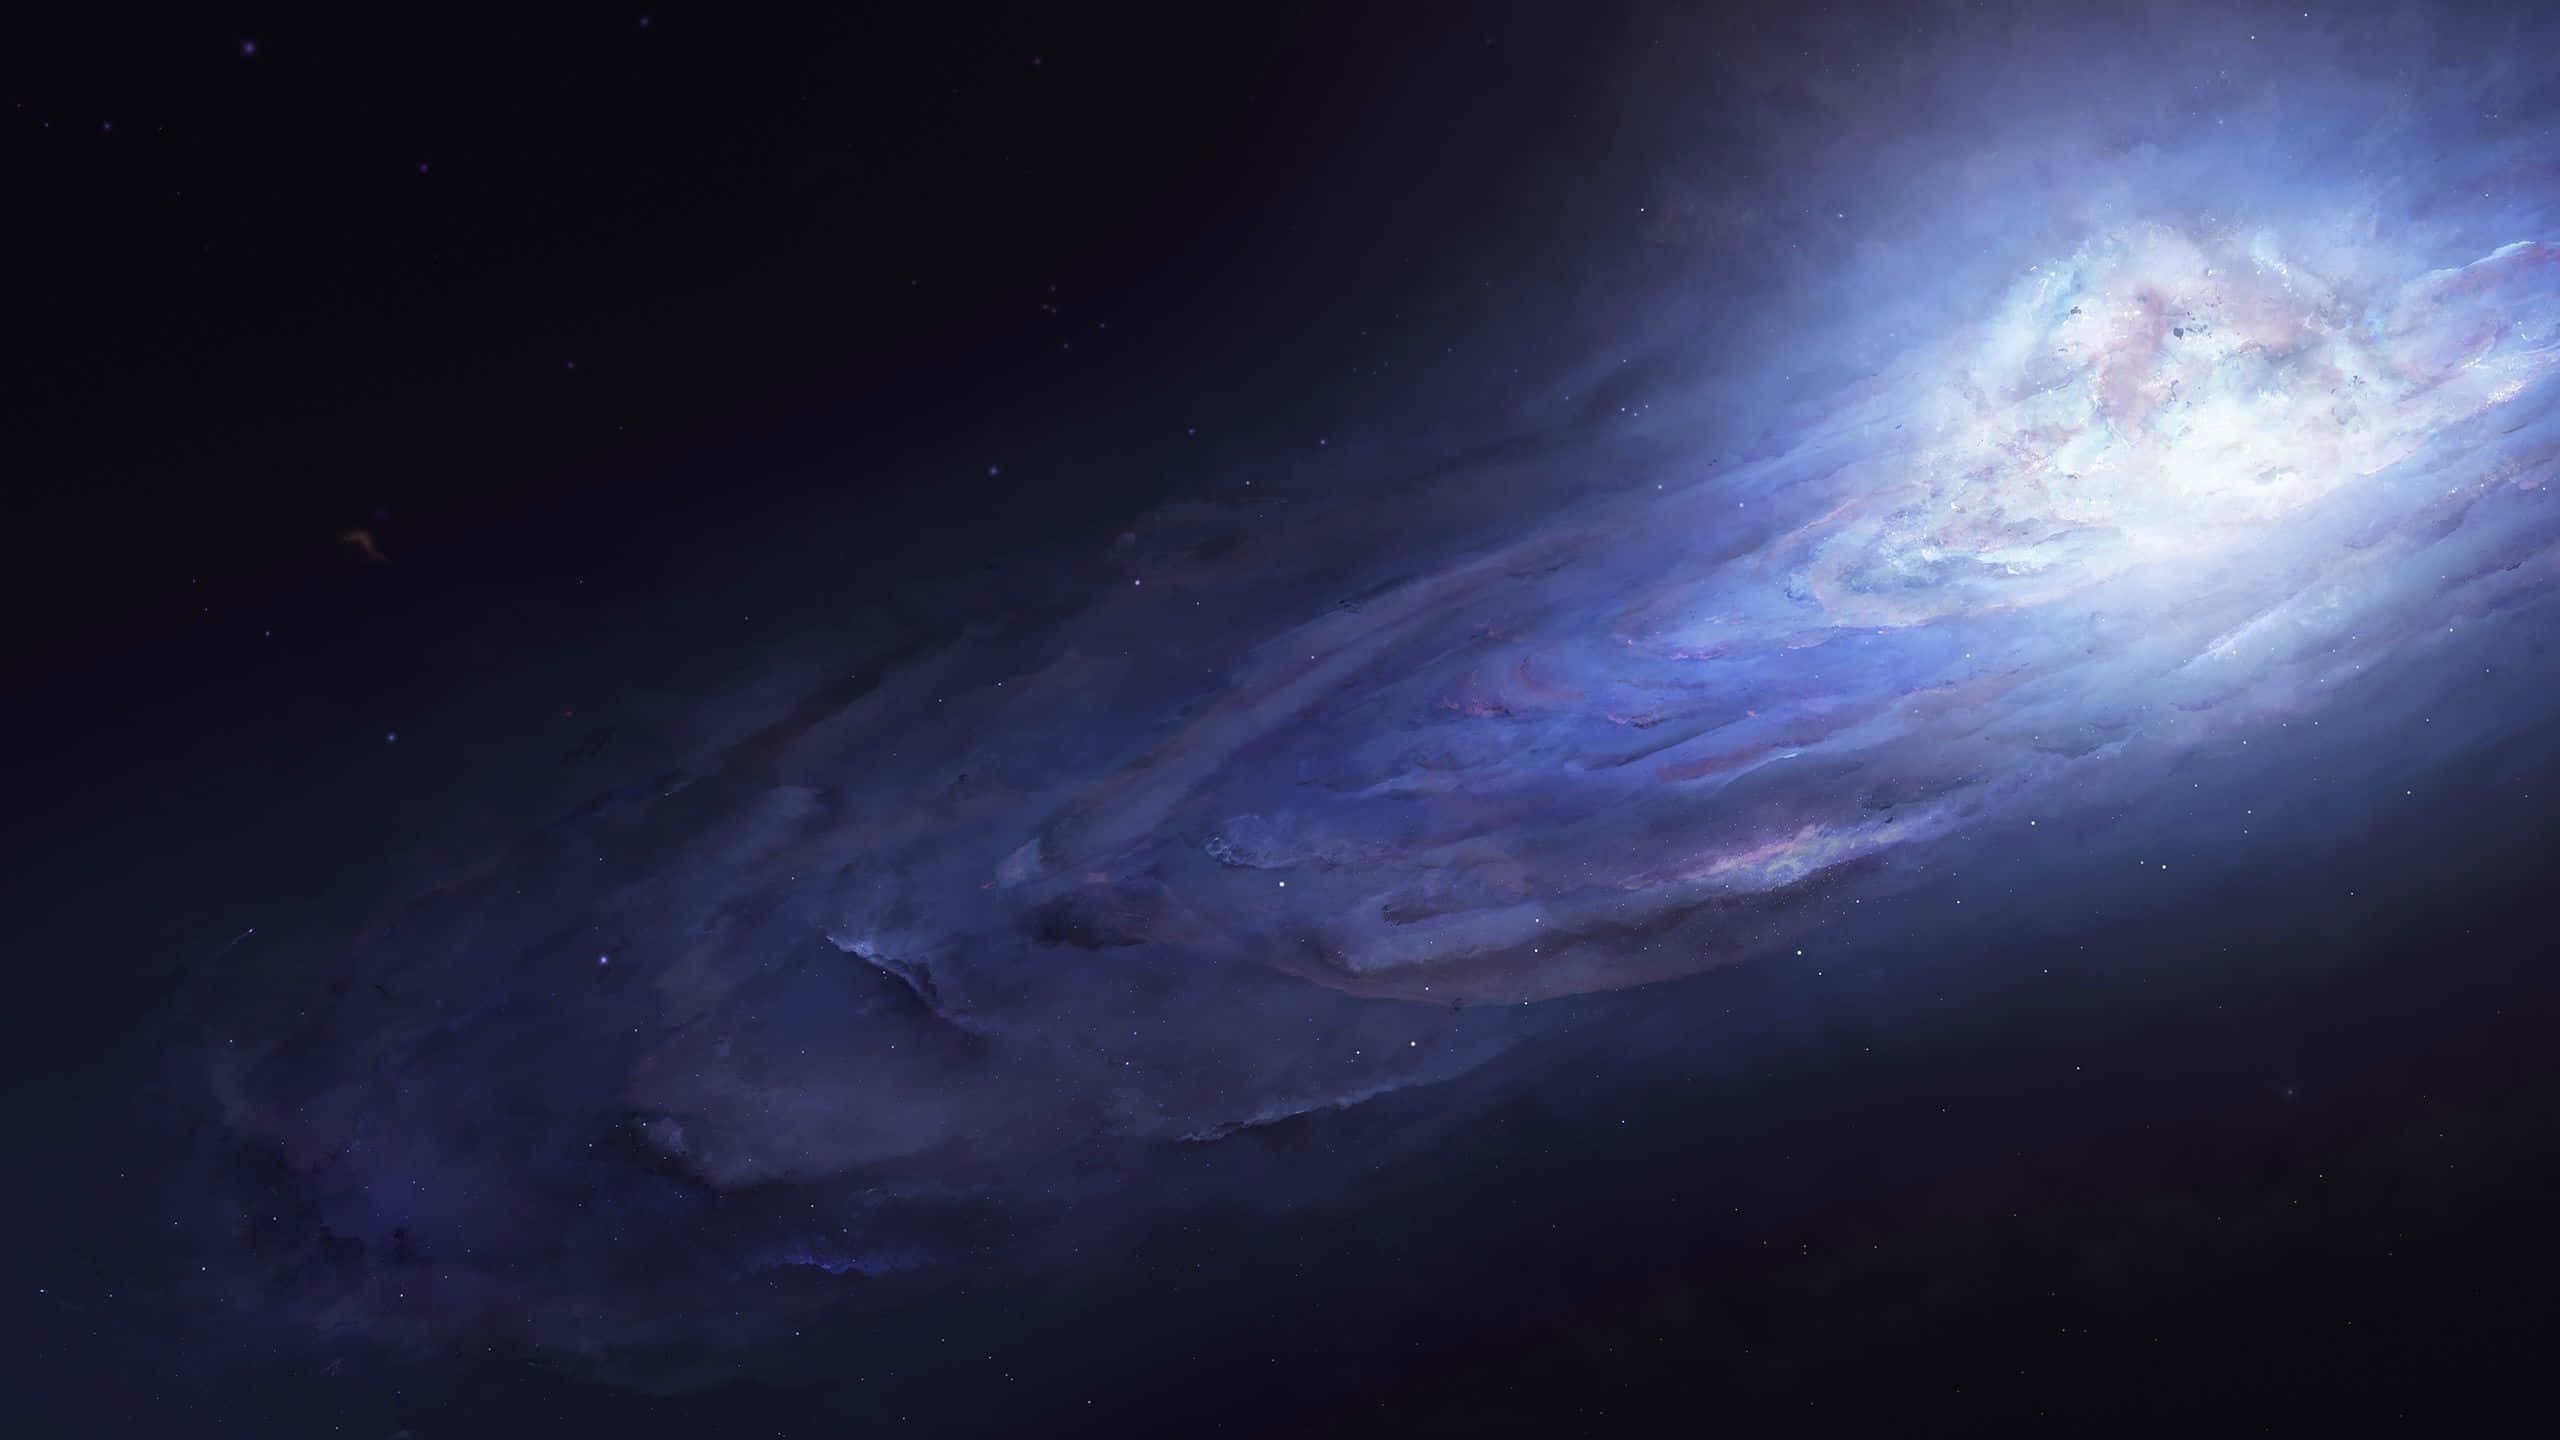 Take a journey through the galaxies with this uplifting artwork Wallpaper